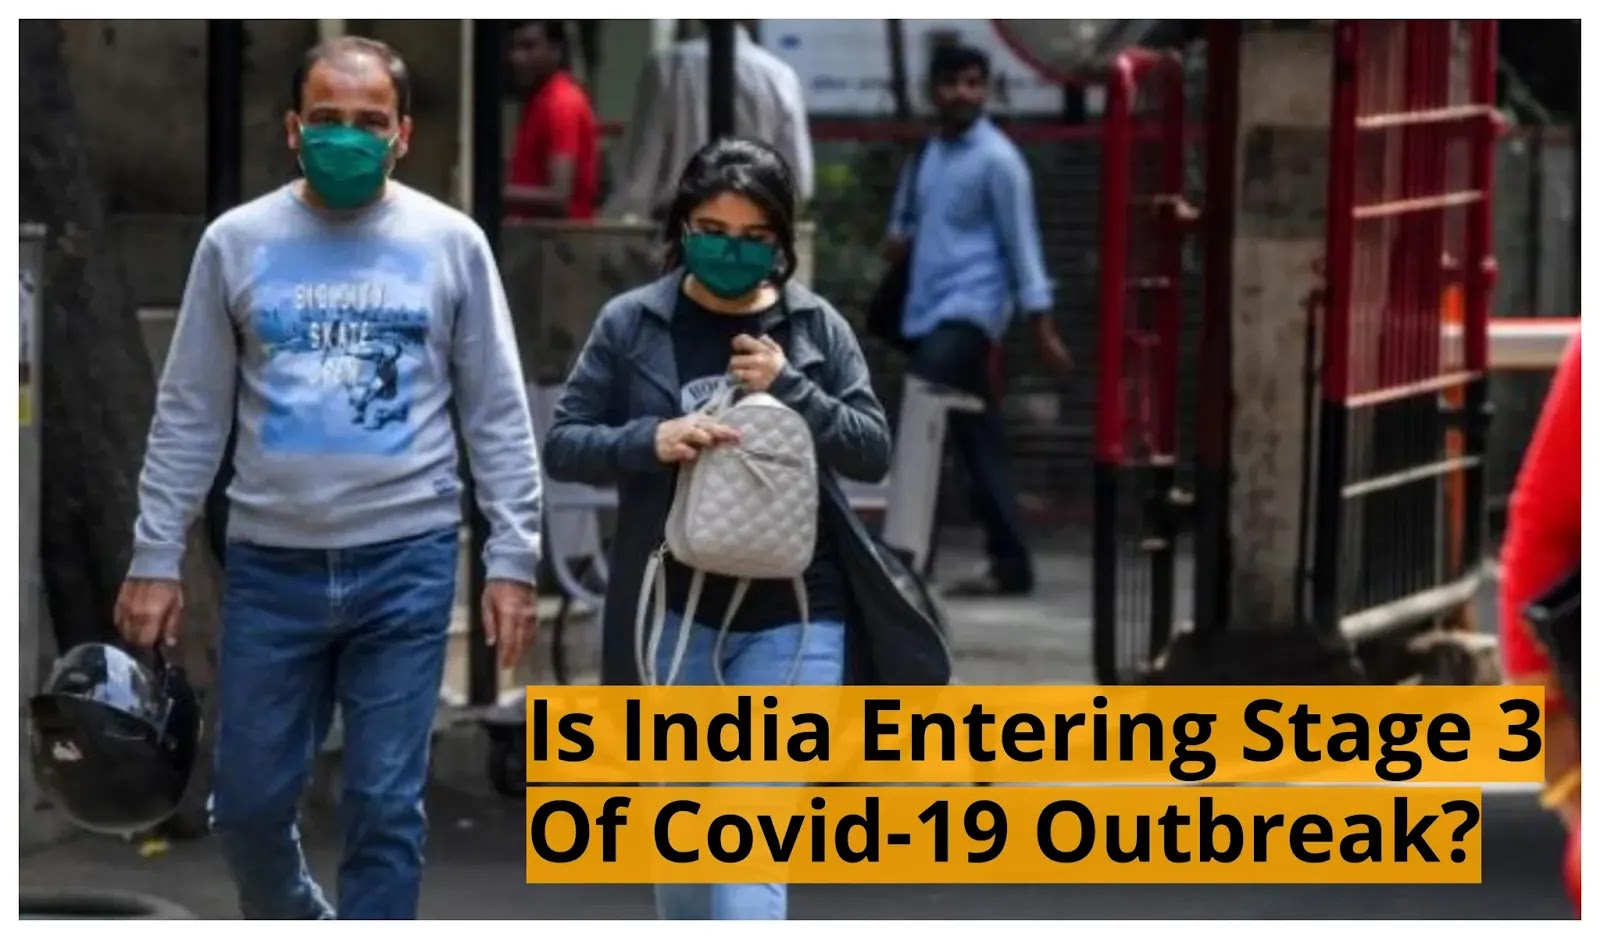 Is India Entering Stage 3 Of Covid-19 Outbreak?